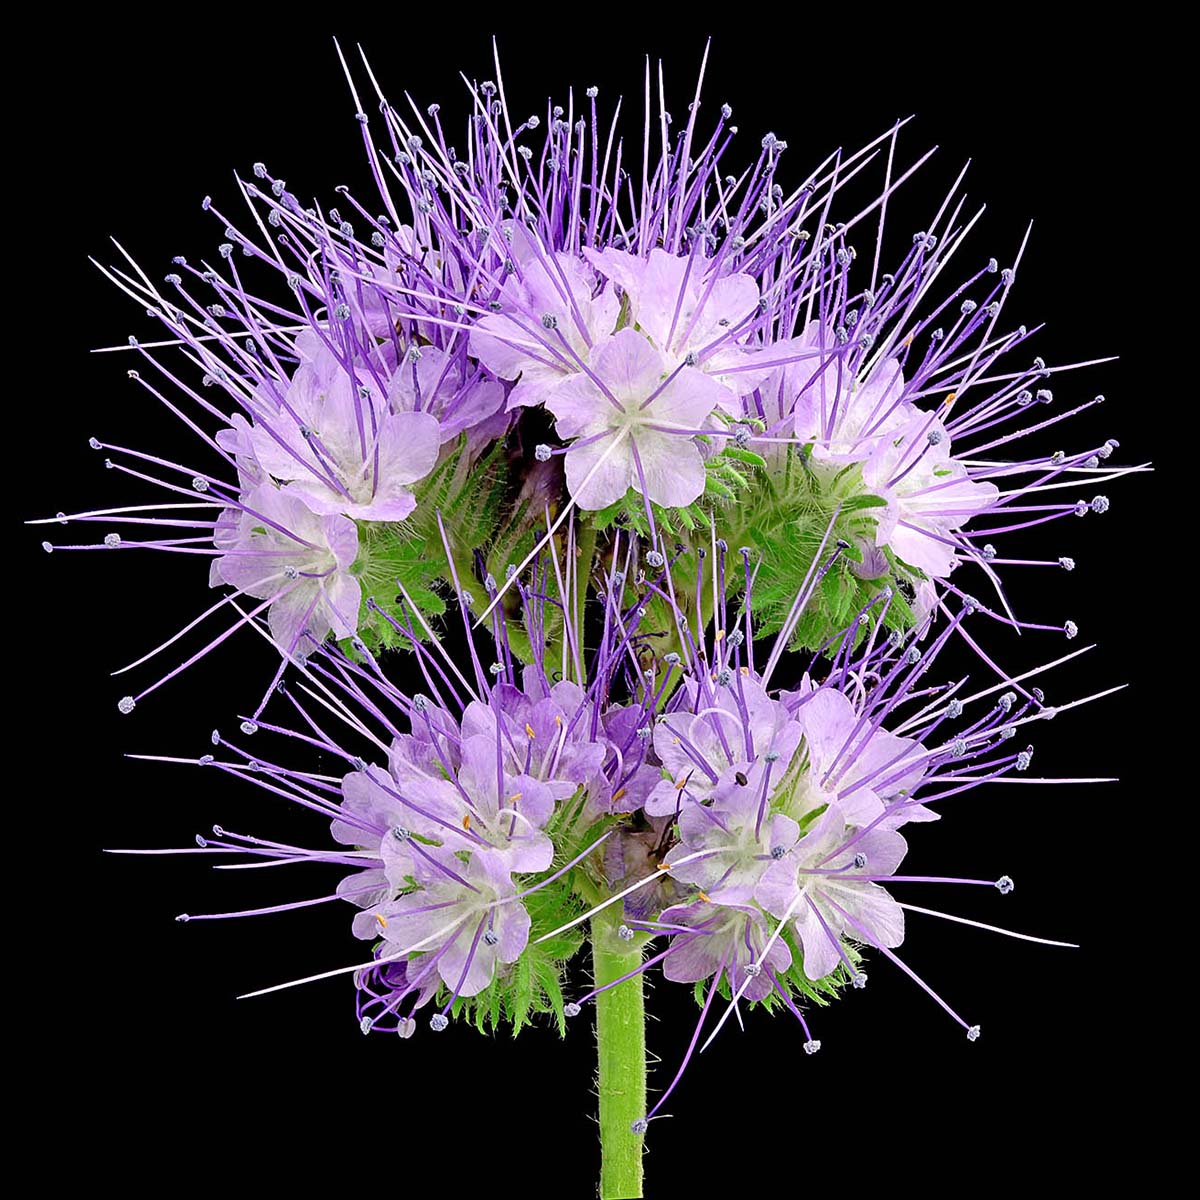 phacelia-is-the-precious-possession-of-grower-maurits-keppel-featured